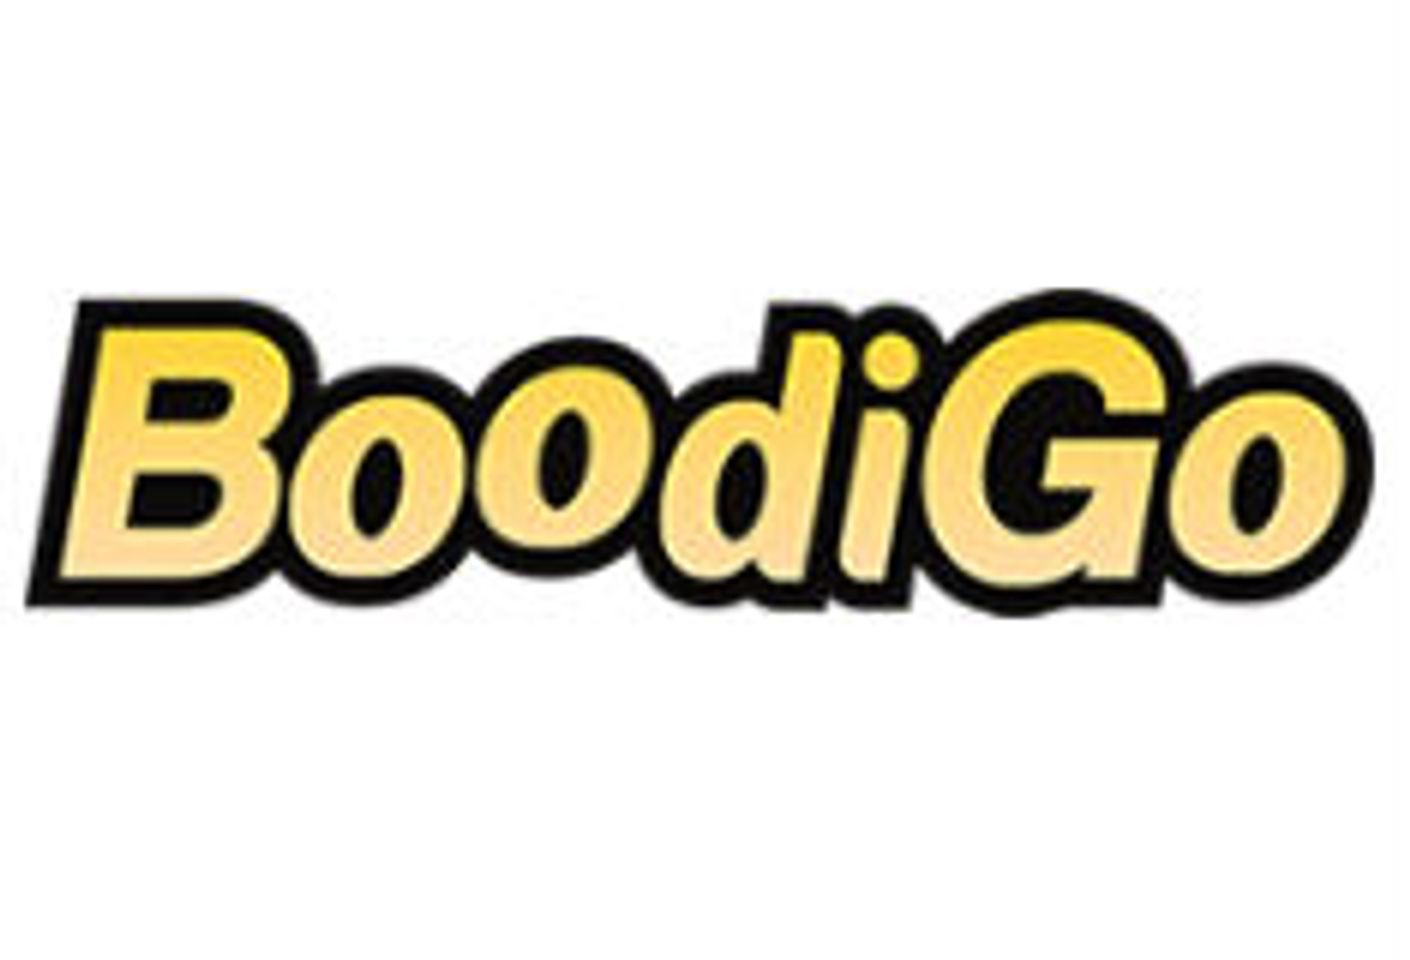 BoodiGo Adopts ASACP Banned Terms List, Supports Online Child Protection